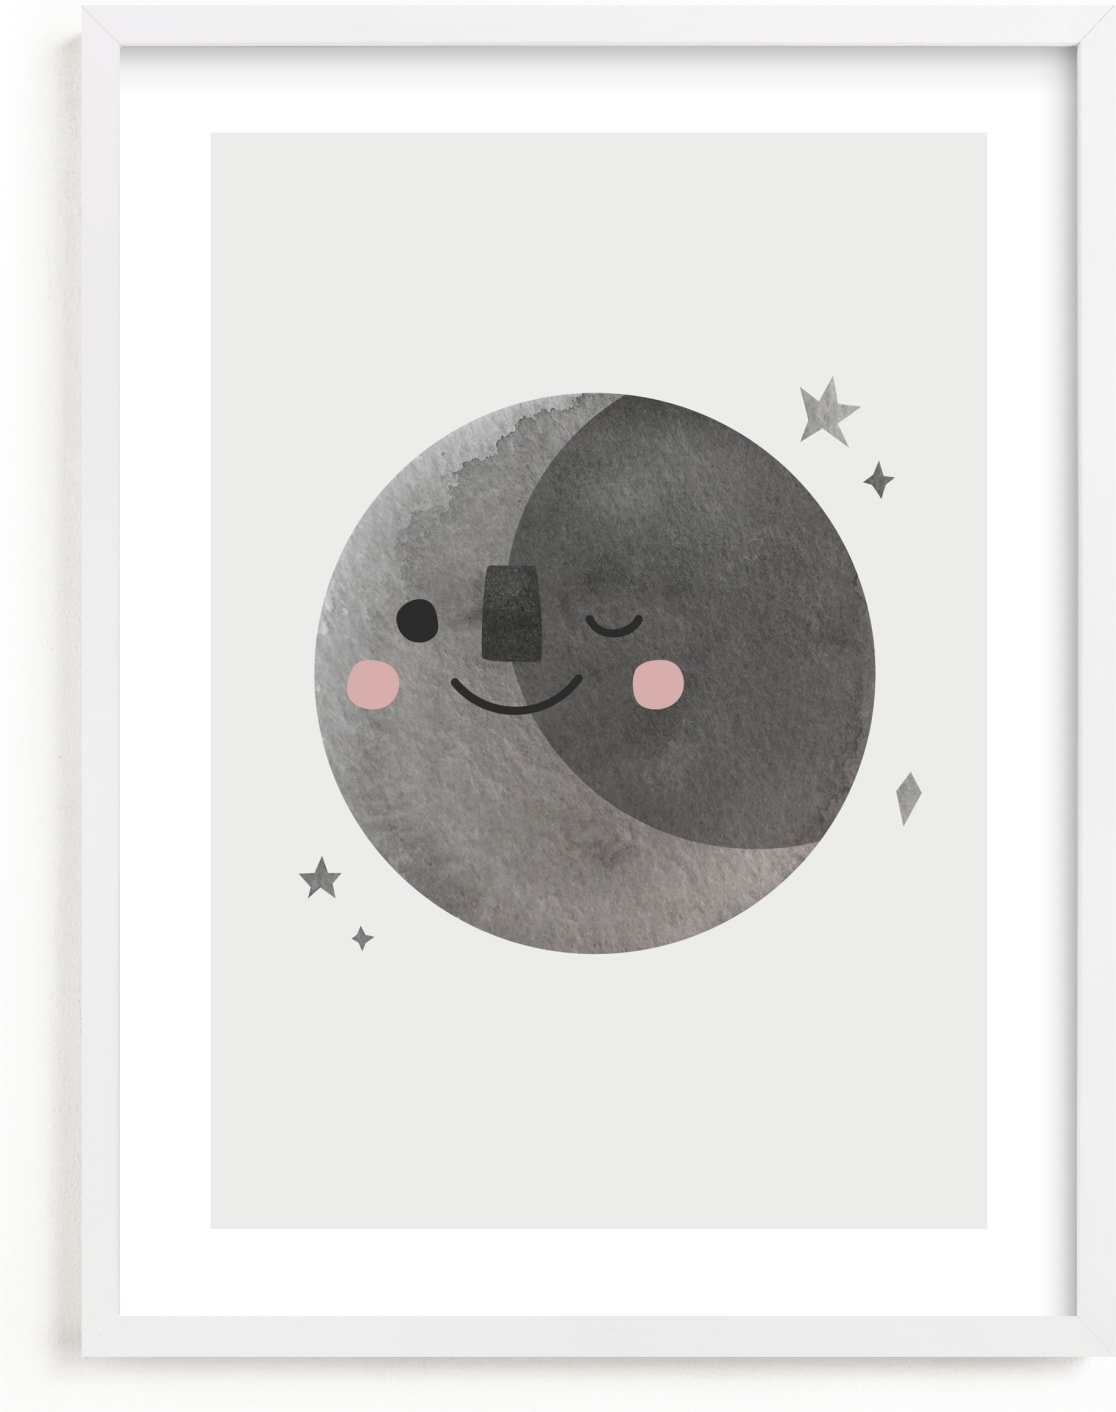 This is a grey art by Mollie Bohannon called A Happy Moon.